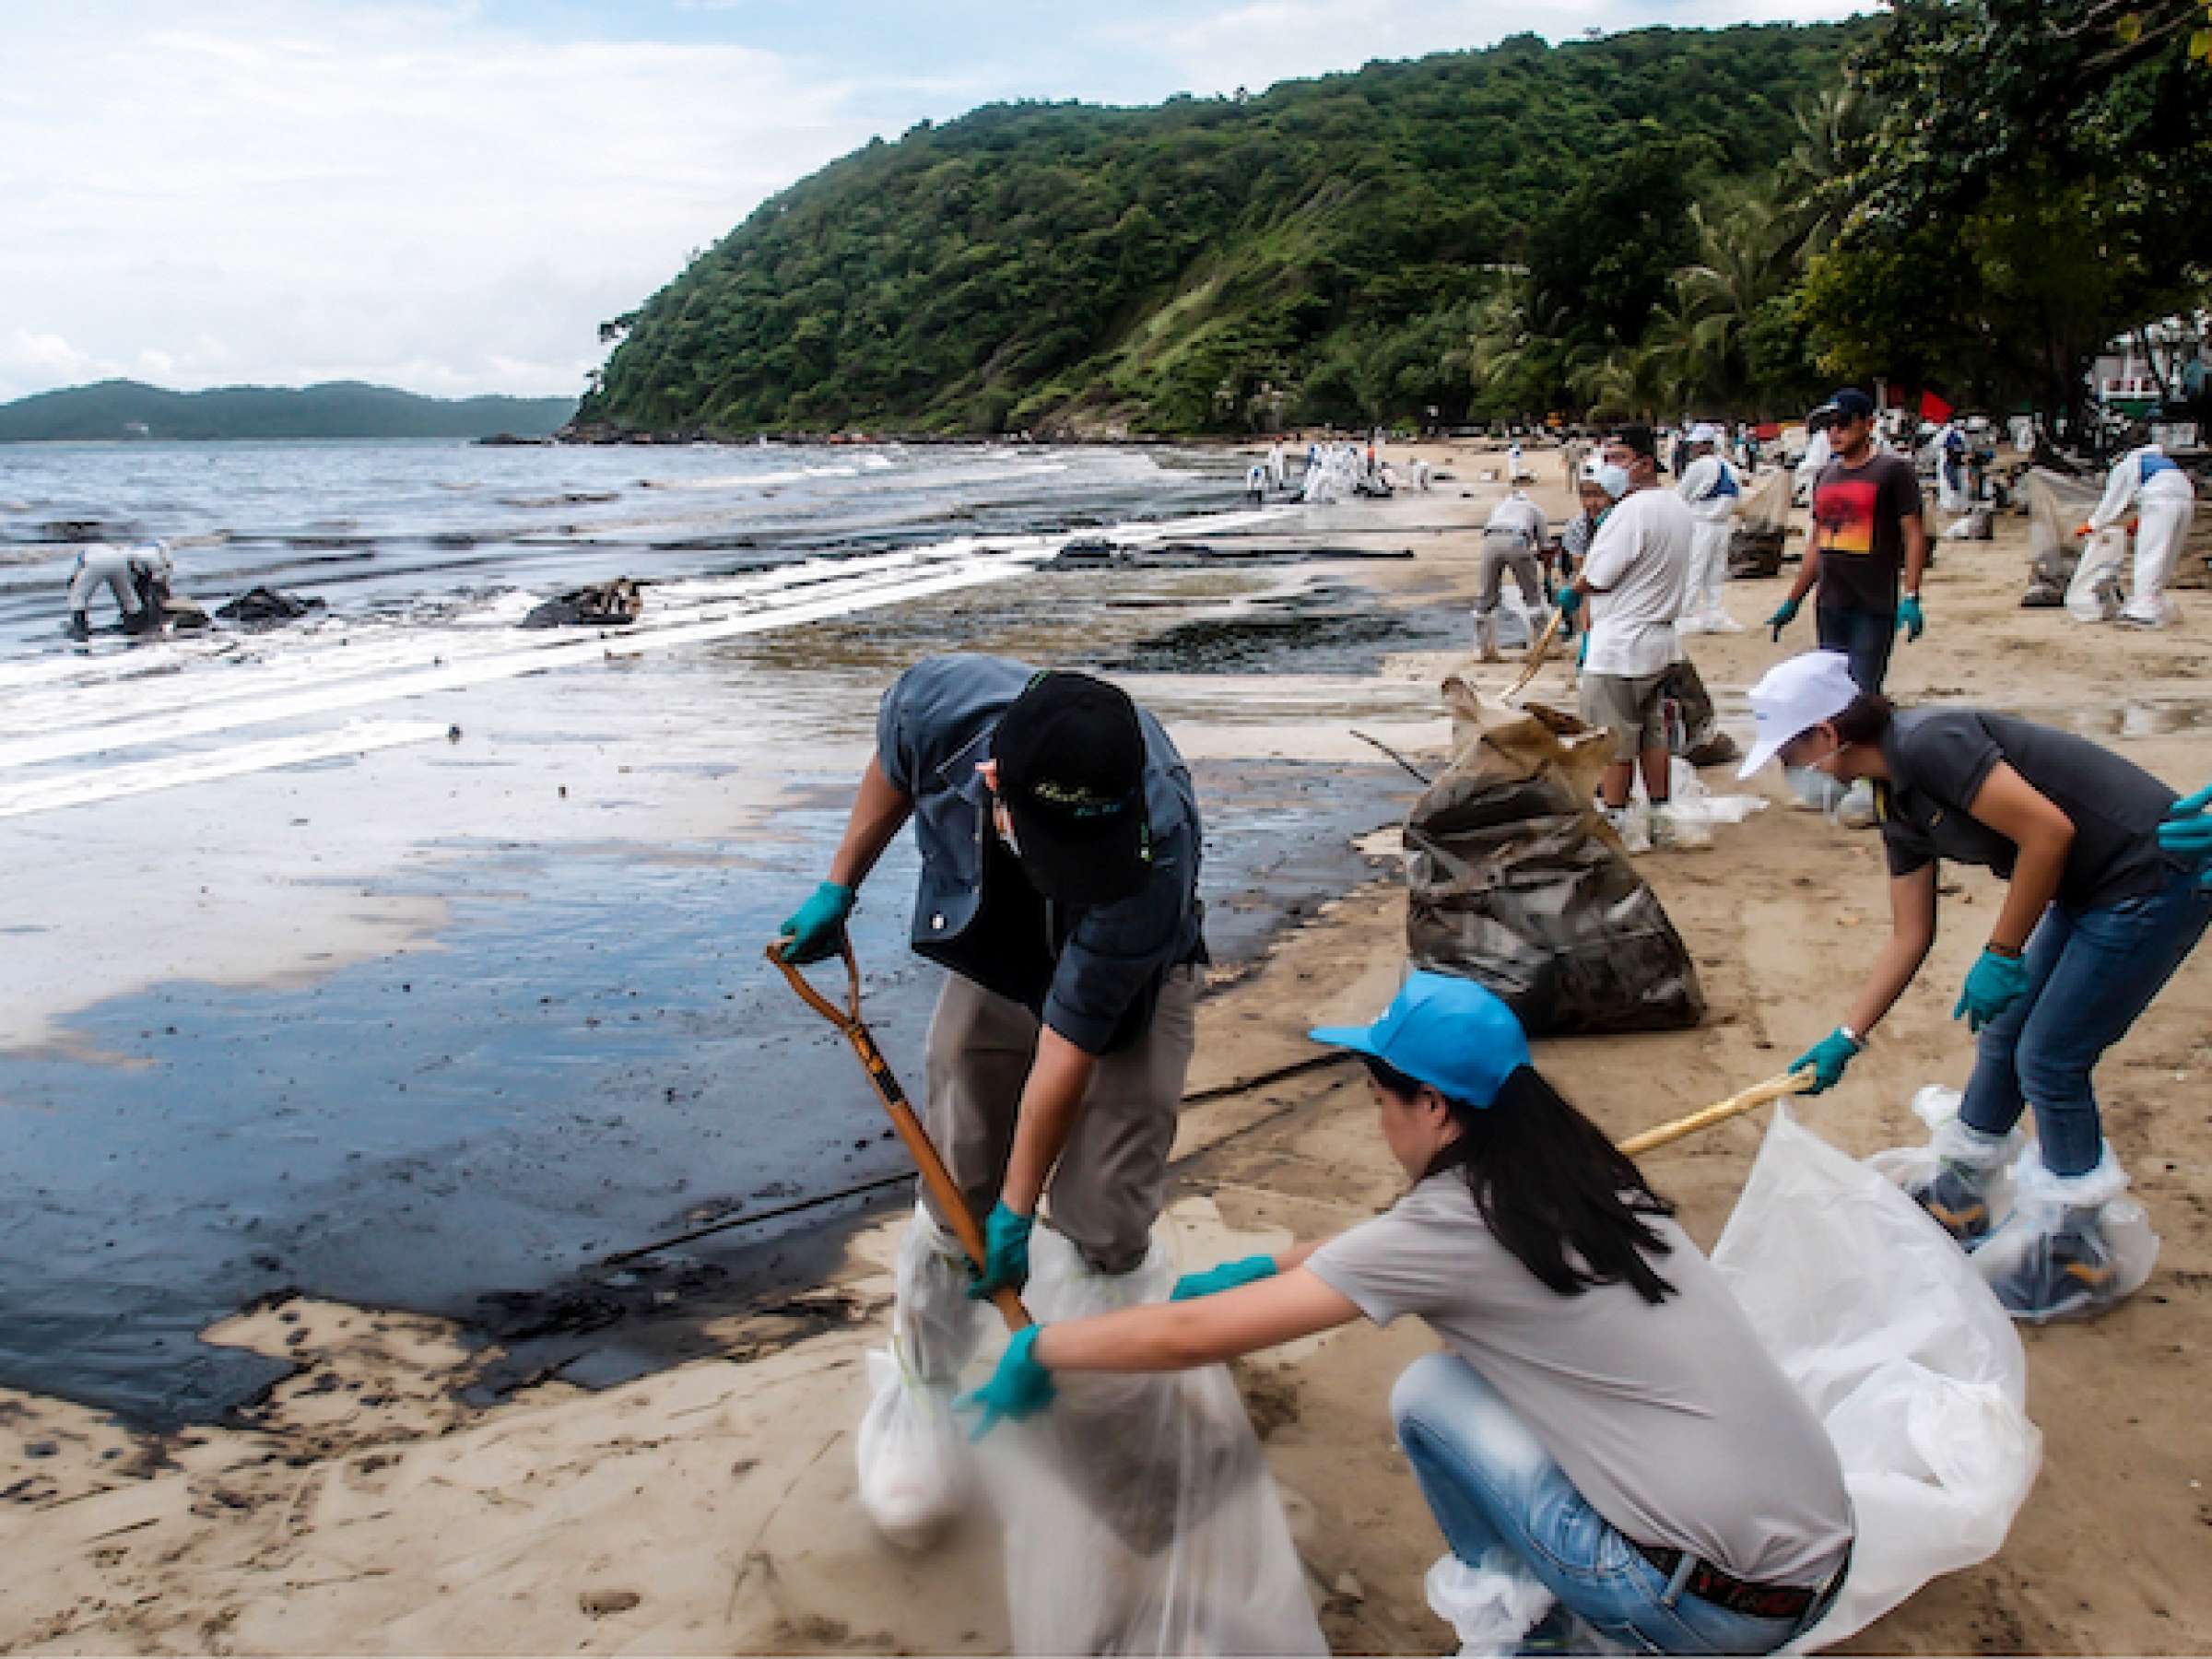 People clearing contaminated sand at the Aou Prow beach, Rayong, Thailand on Jul 31, 2013.